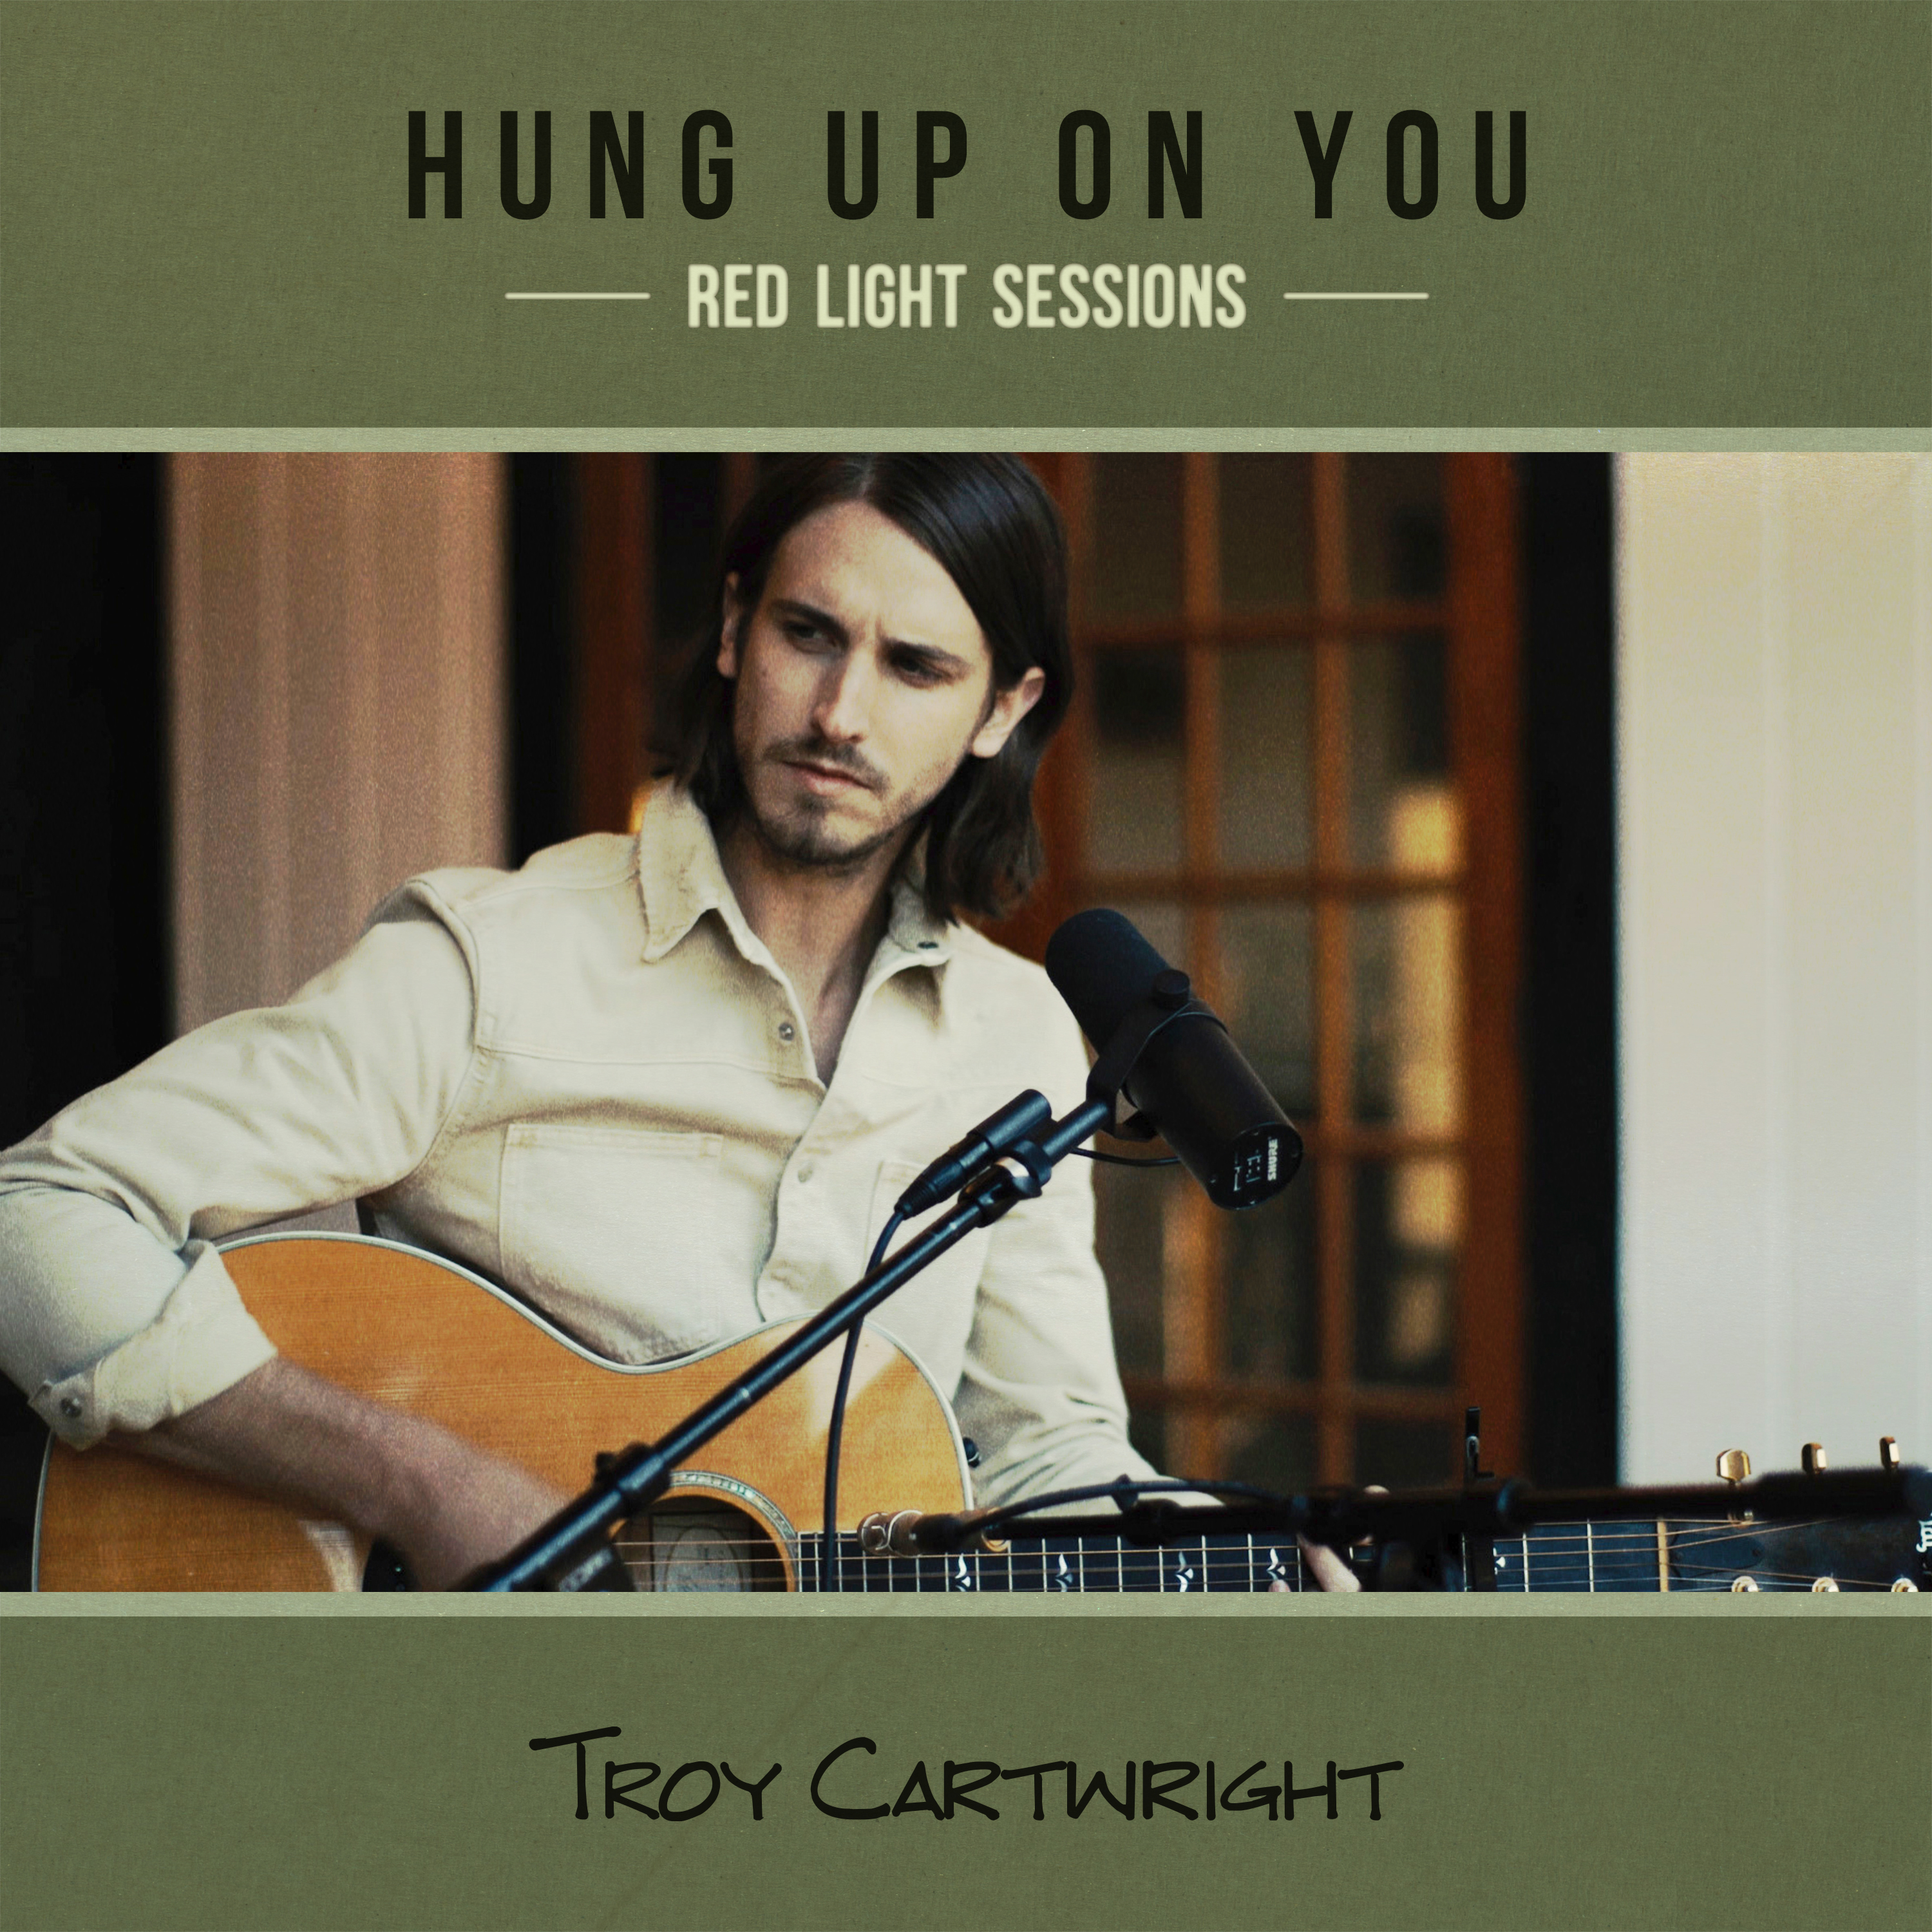 TROY CARTWRIGHT RELEASES “HUNG UP ON YOU” (RED LIGHT SESSIONS)